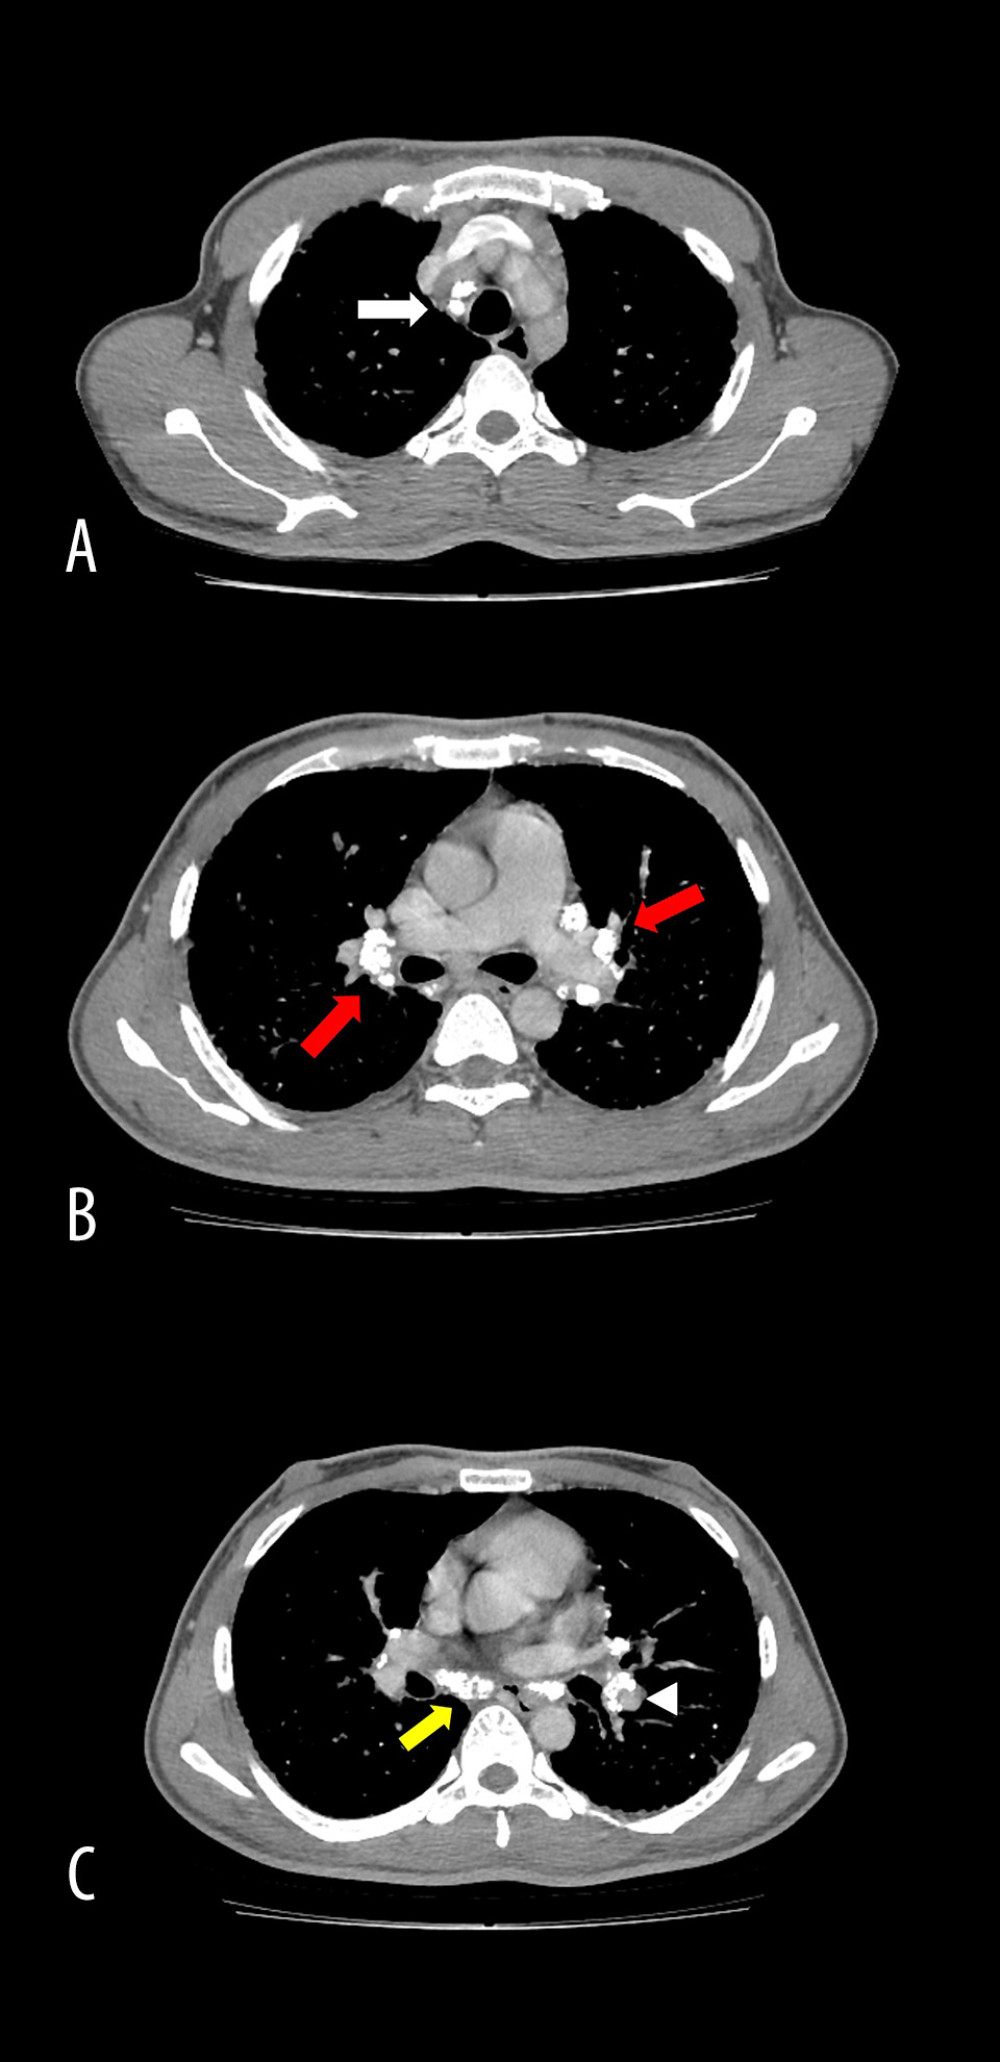 Axial CT (soft tissue window with contrast) images show enlarged lymph nodes with characteristic eggshell calcifications in the right paratracheal area (A; white arrow); hilar area (B; red arrows), subcarinal area (C; yellow arrow), and left peribronchial region (C; white arrowhead).